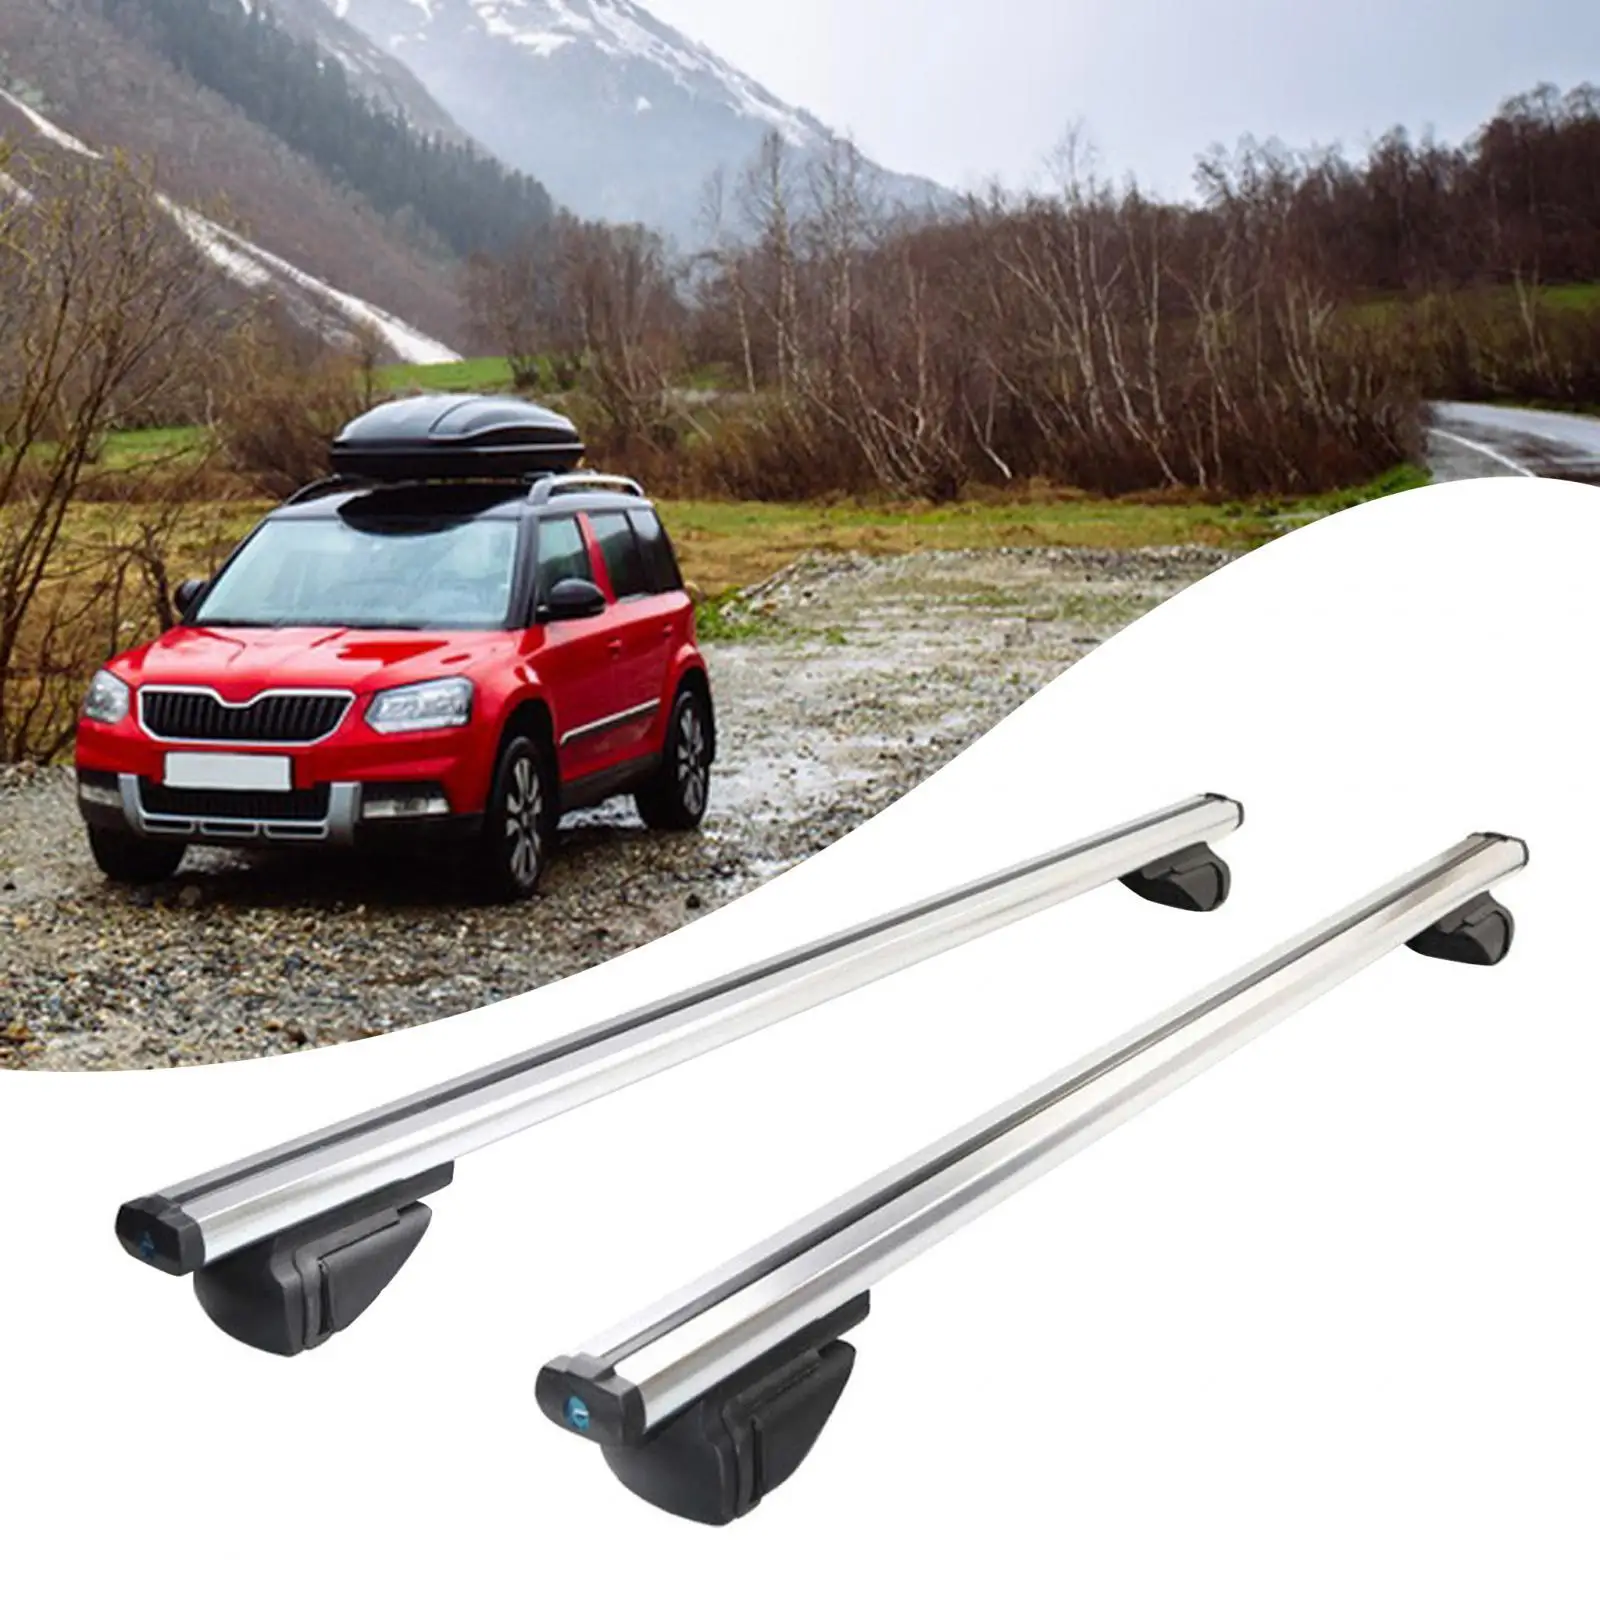 Car Roof Racks Cross Bars Luggage Carrier Cargo Bars Heavy Duty Universal Crossbars for SUV Automobiles Vehicle Most Car